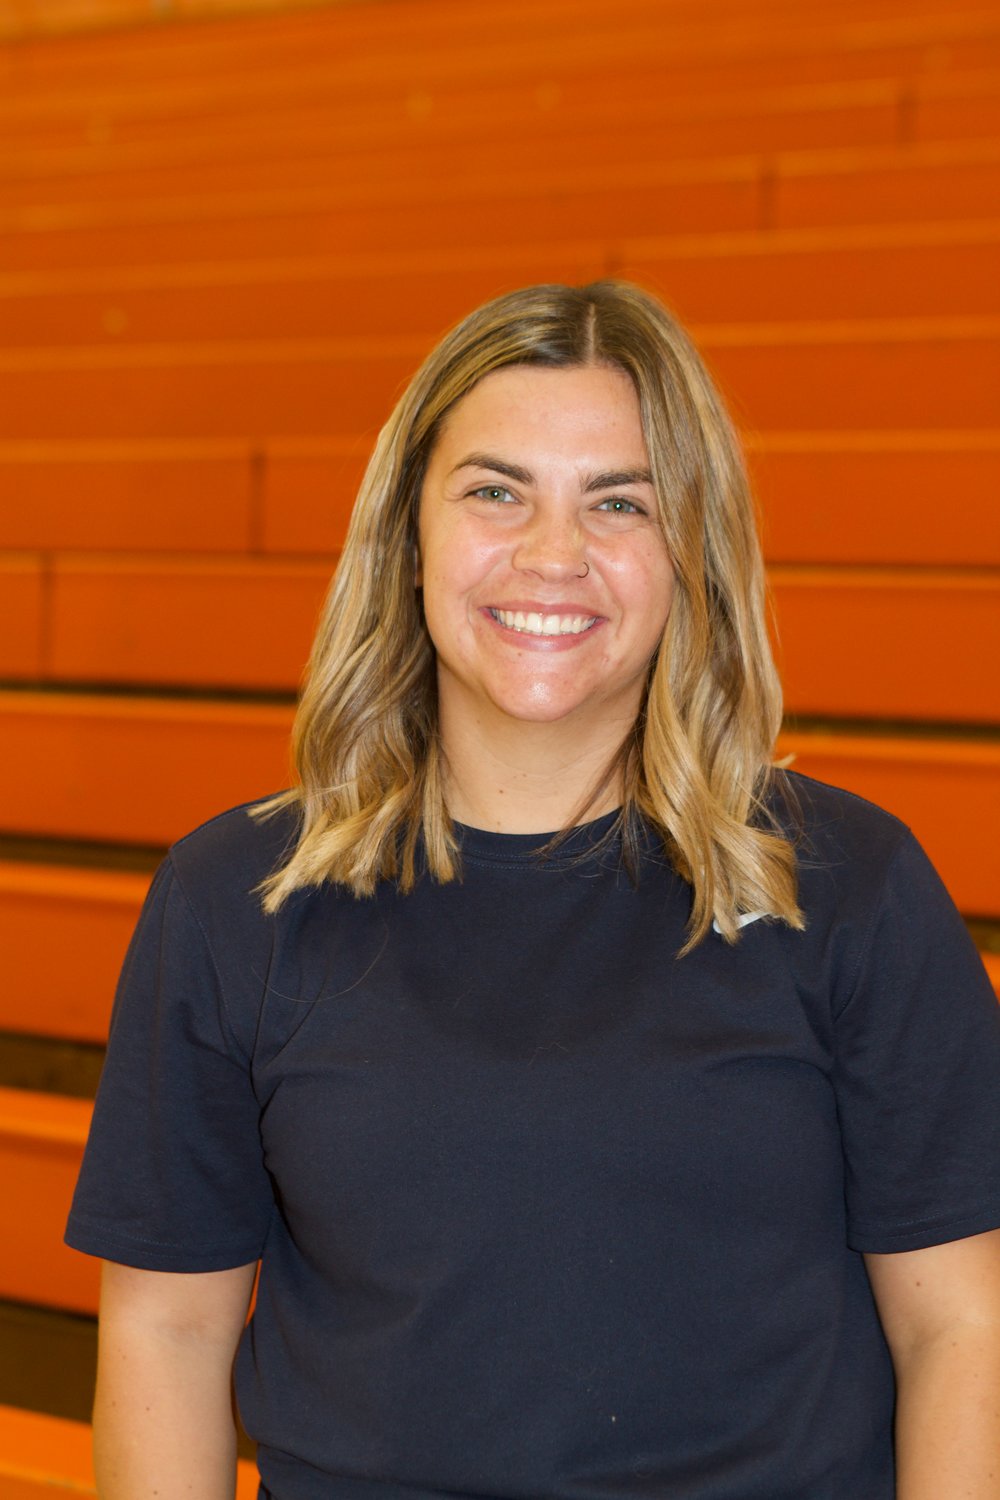 Taylor Dyson begins her first season as the Chargers VB coach as she looks to build a foundation for success.